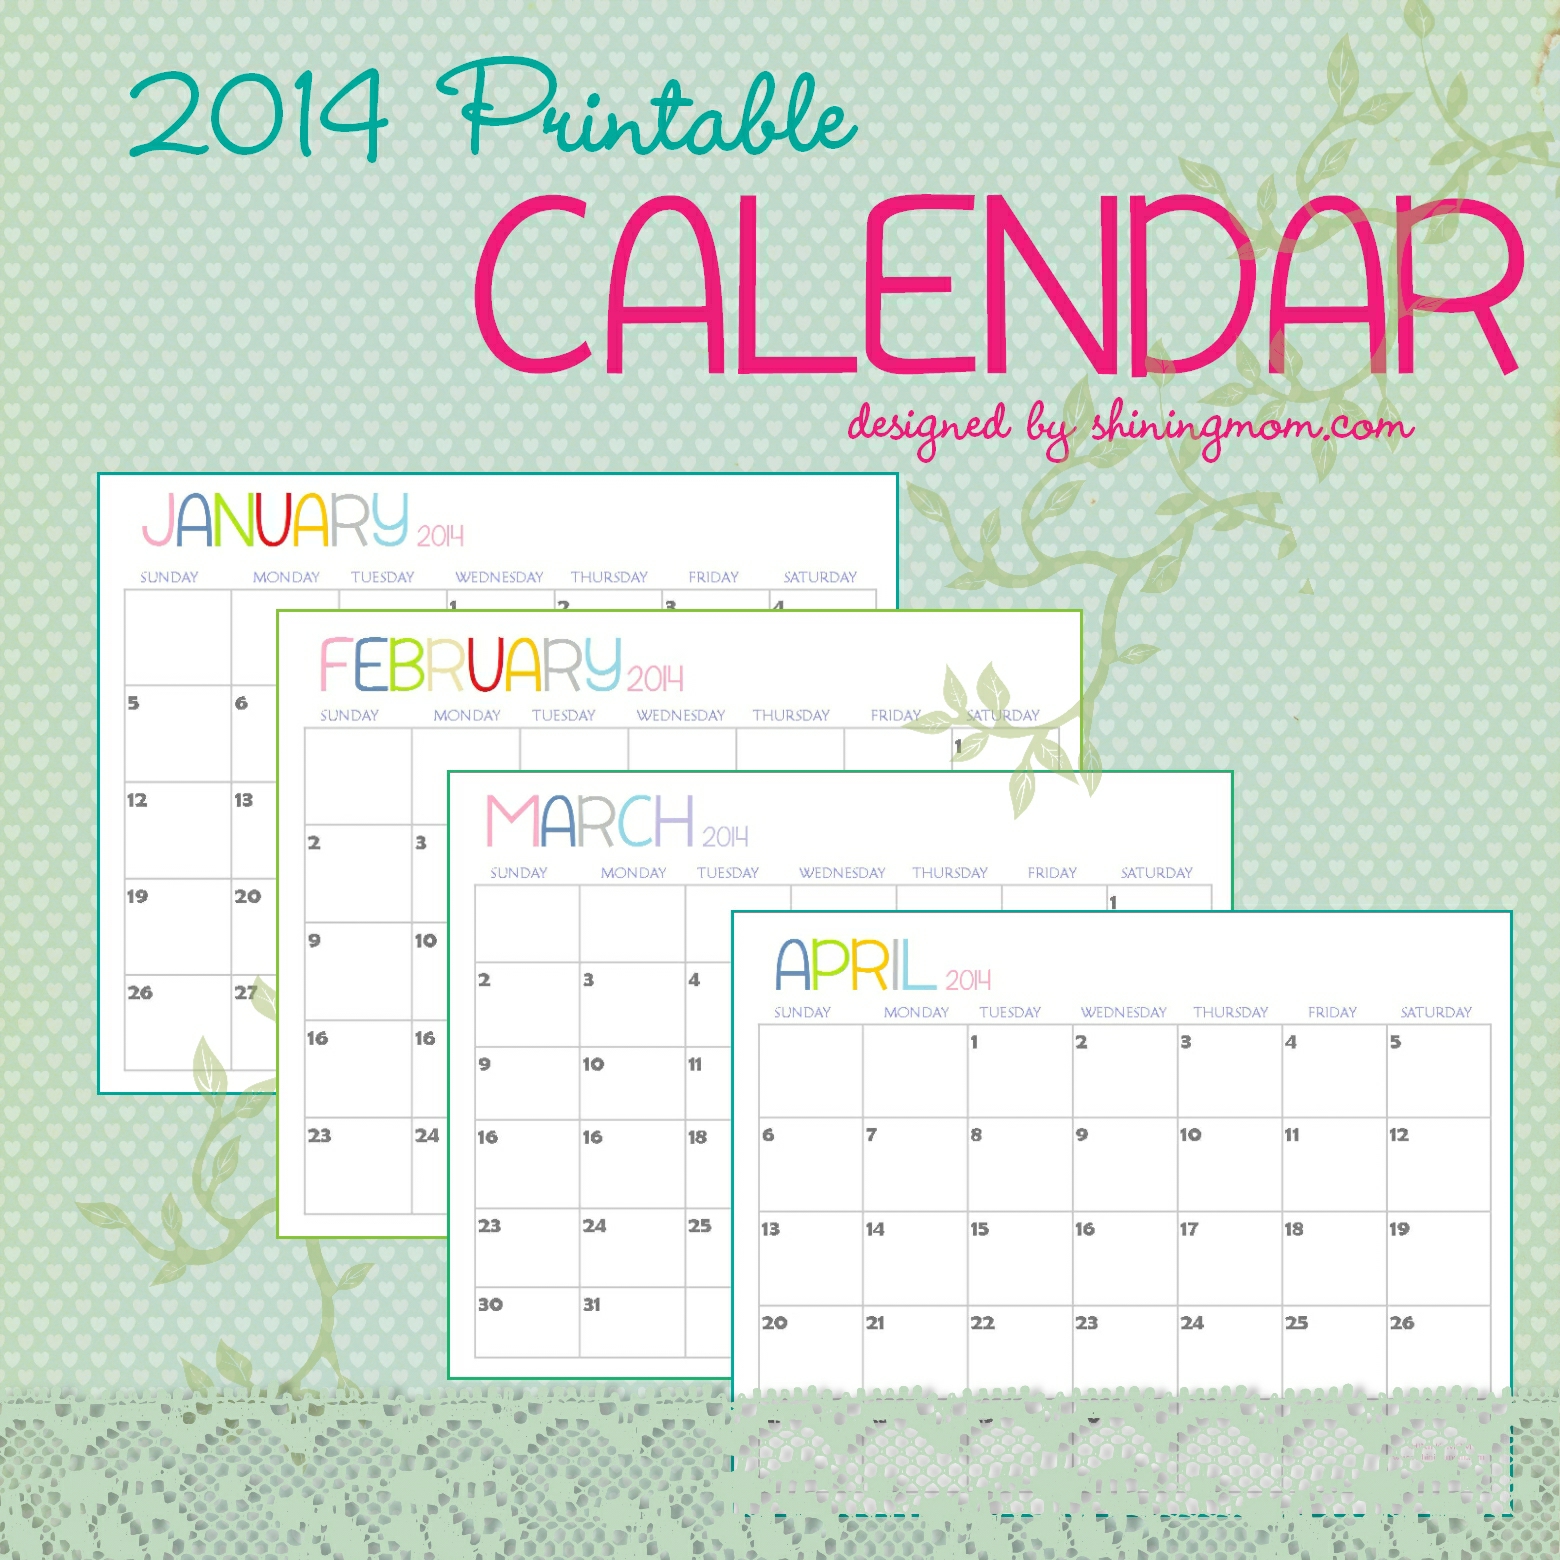 the-free-printable-2014-calendar-by-shining-mom-is-here